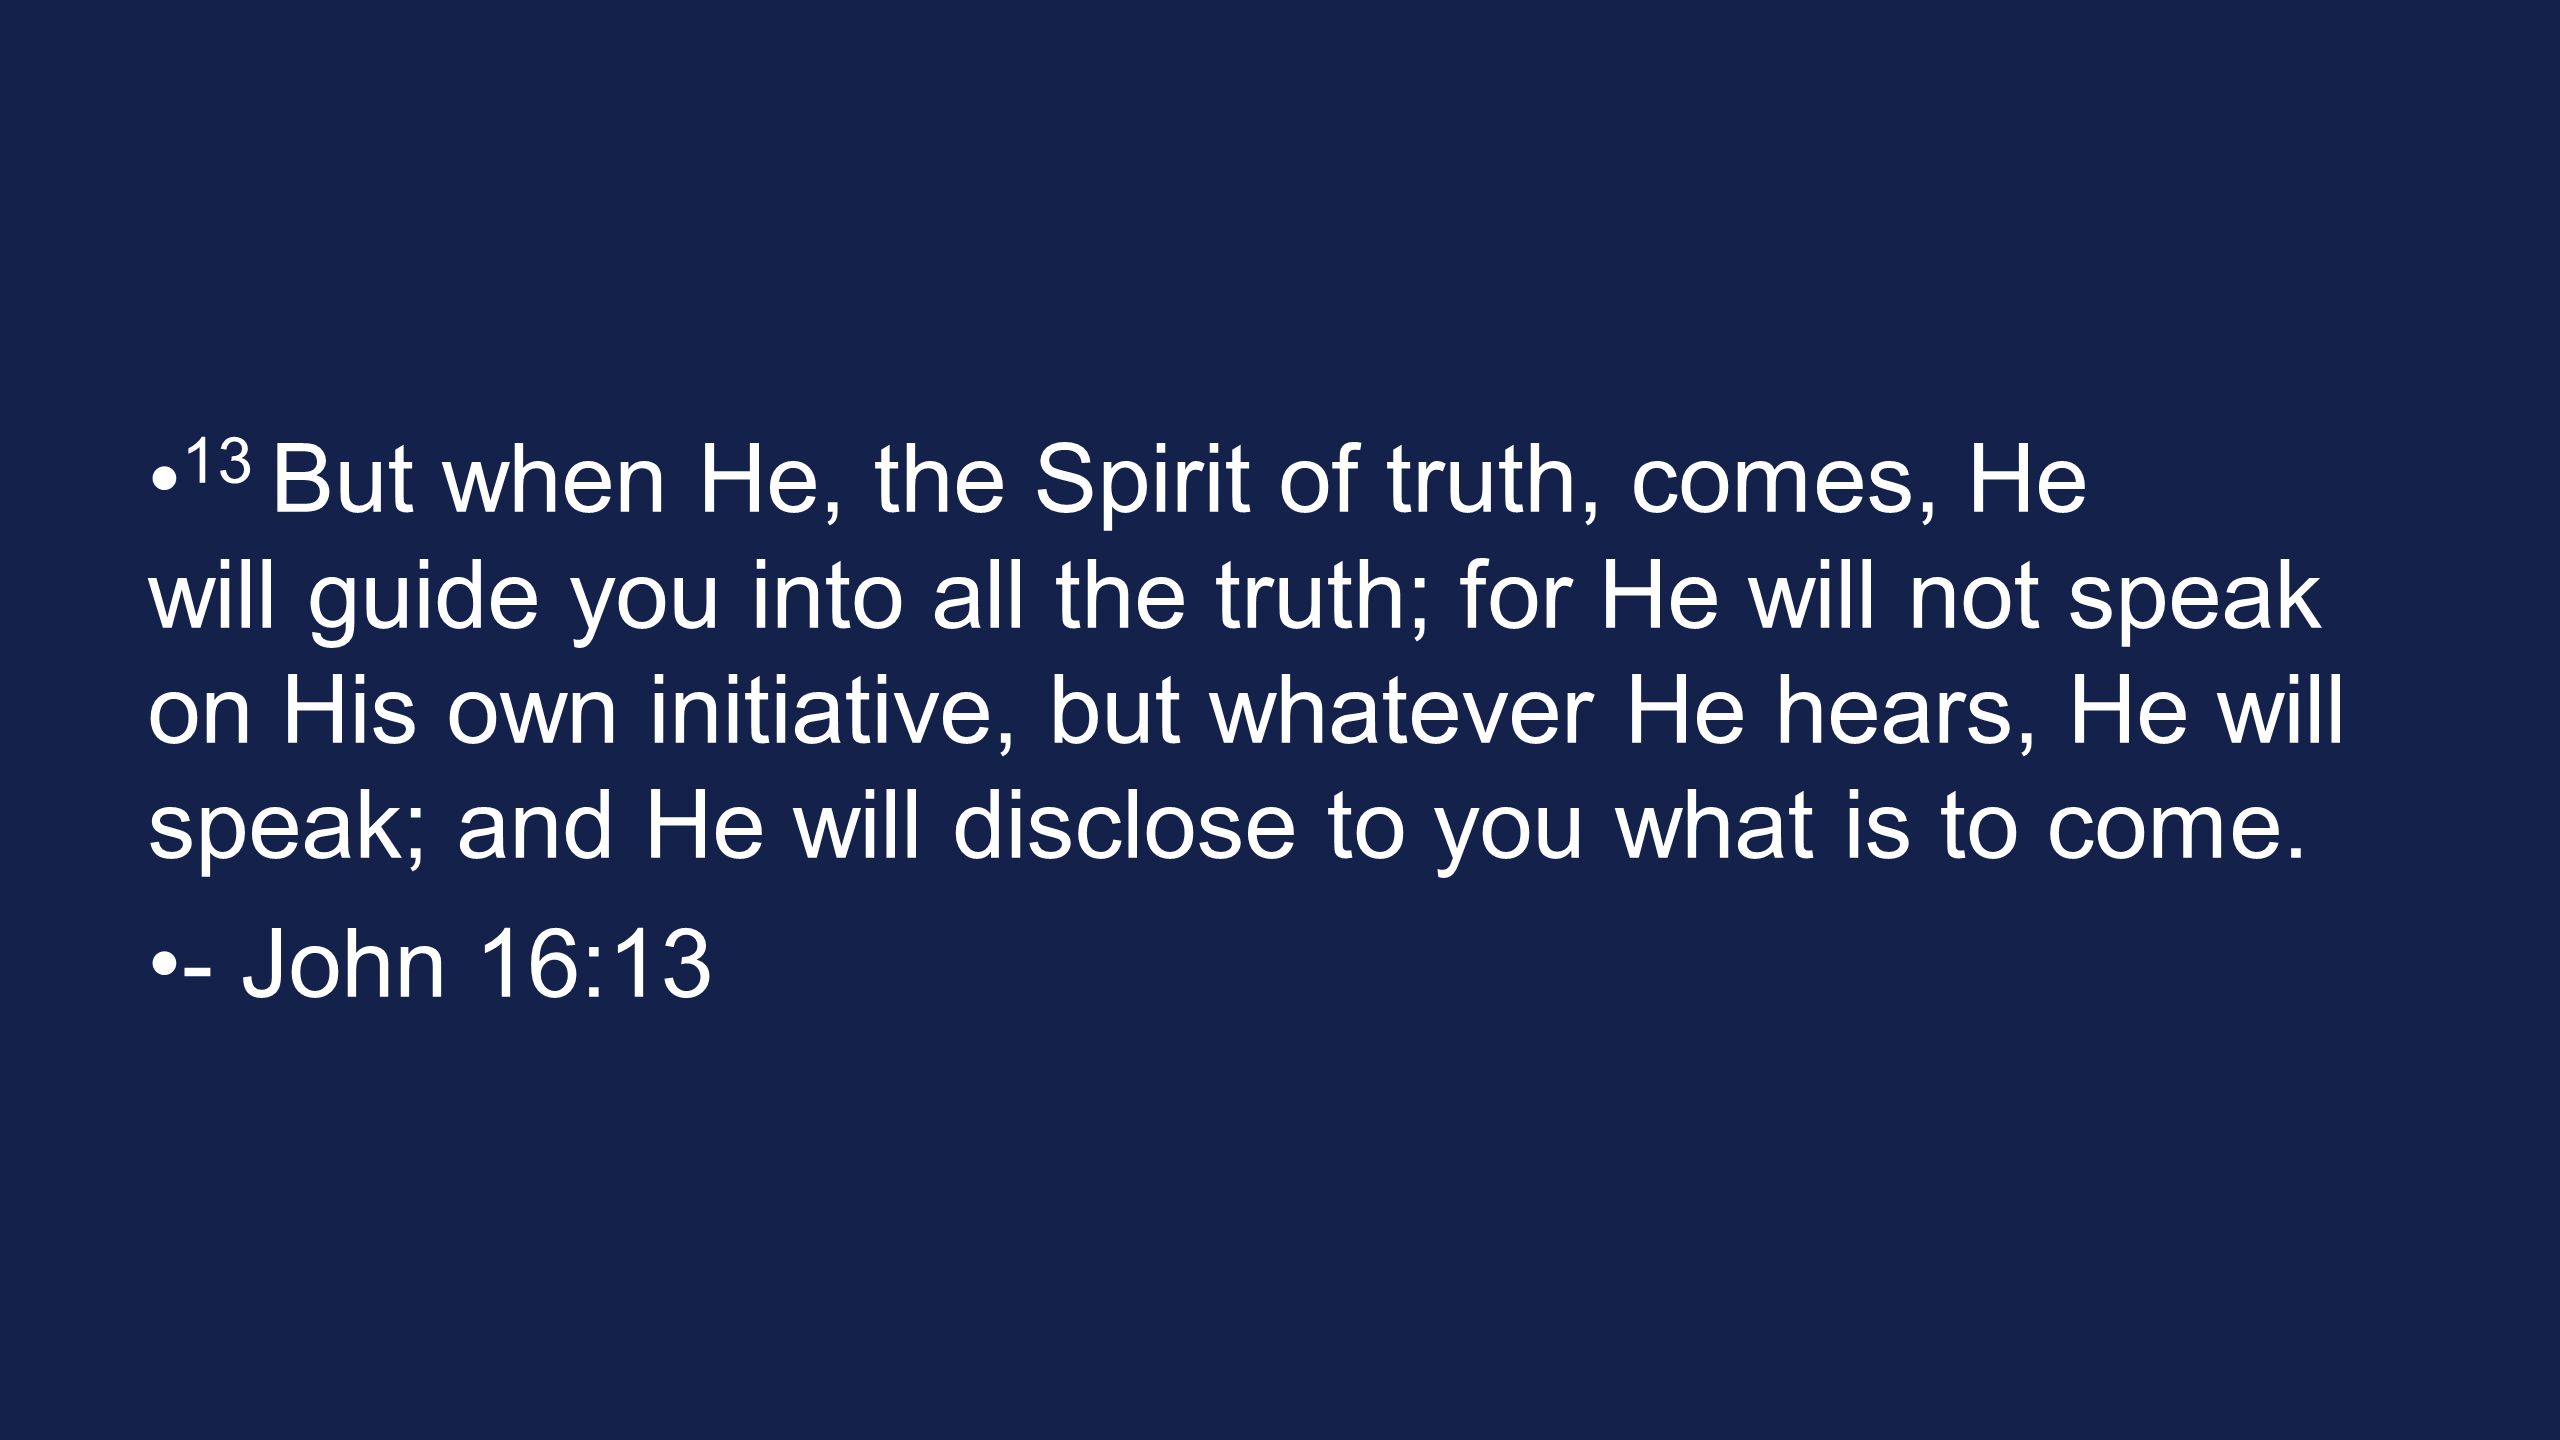 13 But when He, the Spirit of truth, comes, He will guide you into all the truth; for He will not speak on His own initiative, but whatever He hears, He will speak; and He will disclose to you what is to come.